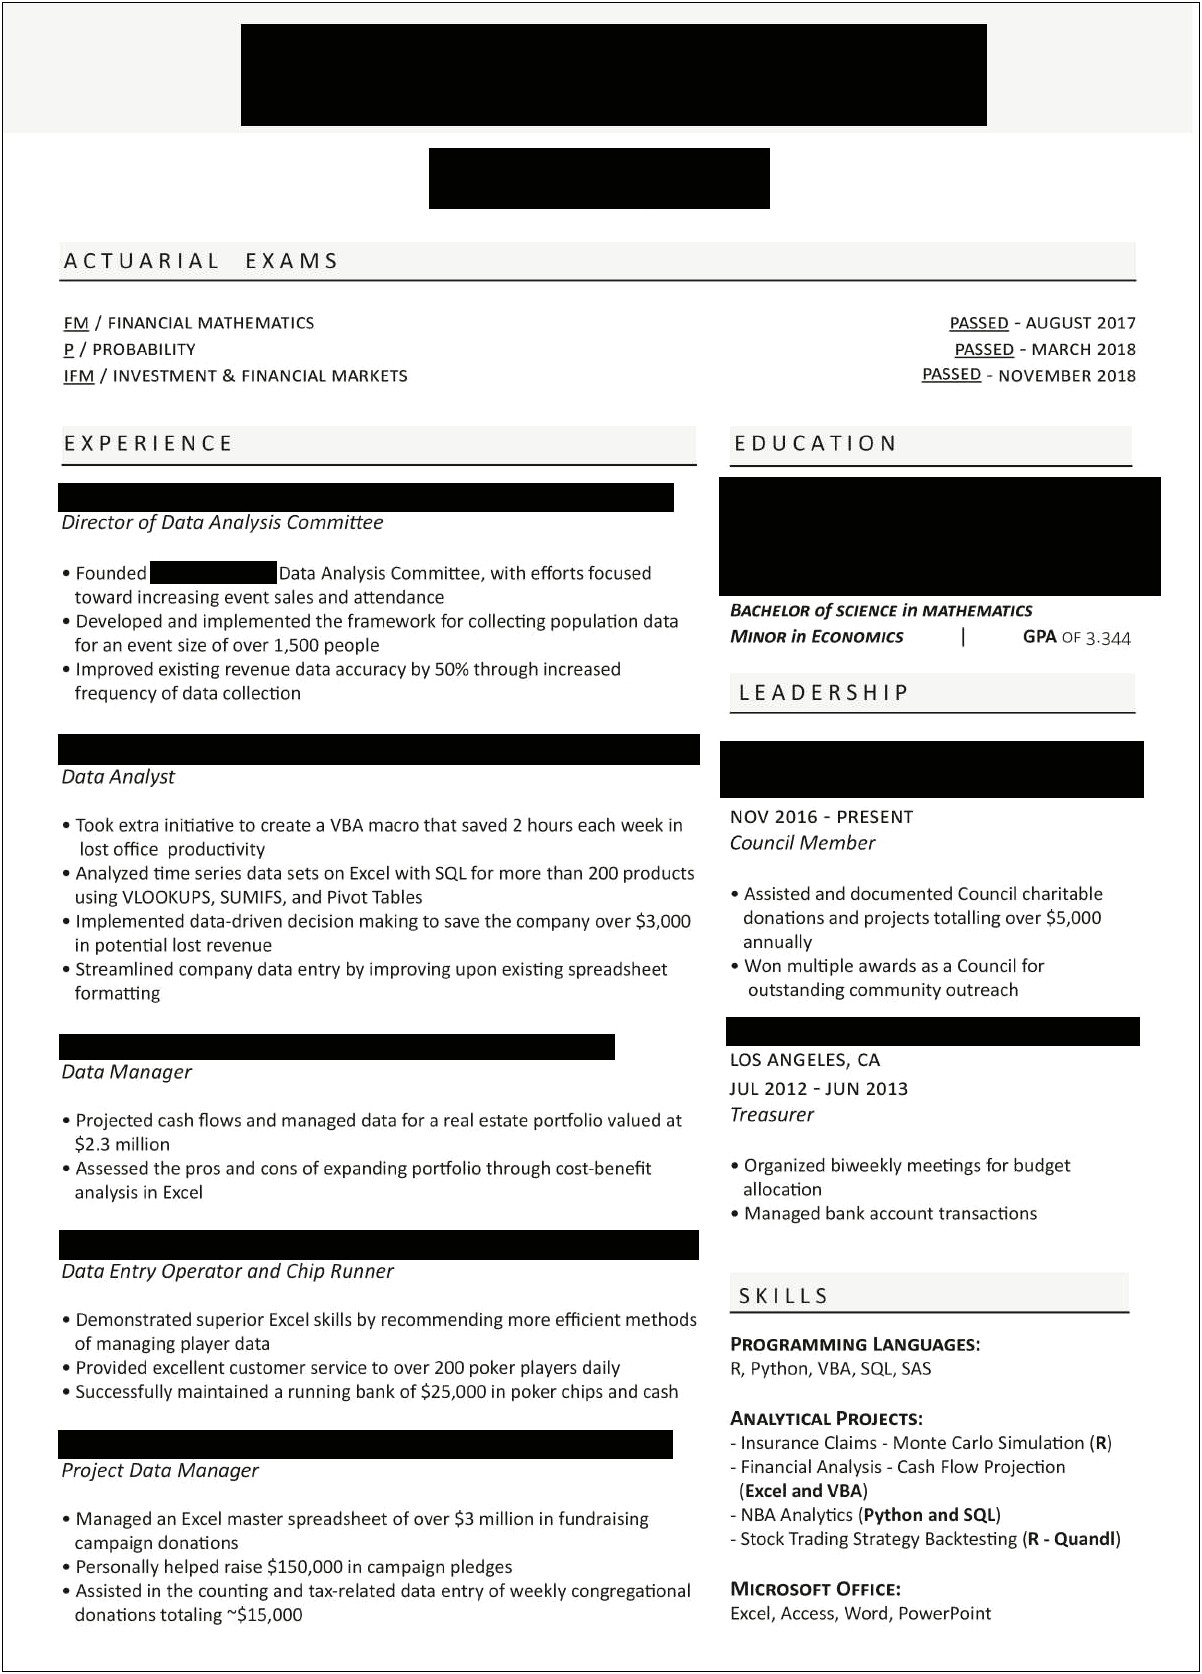 Sample Entry Level Actuarial Resumes